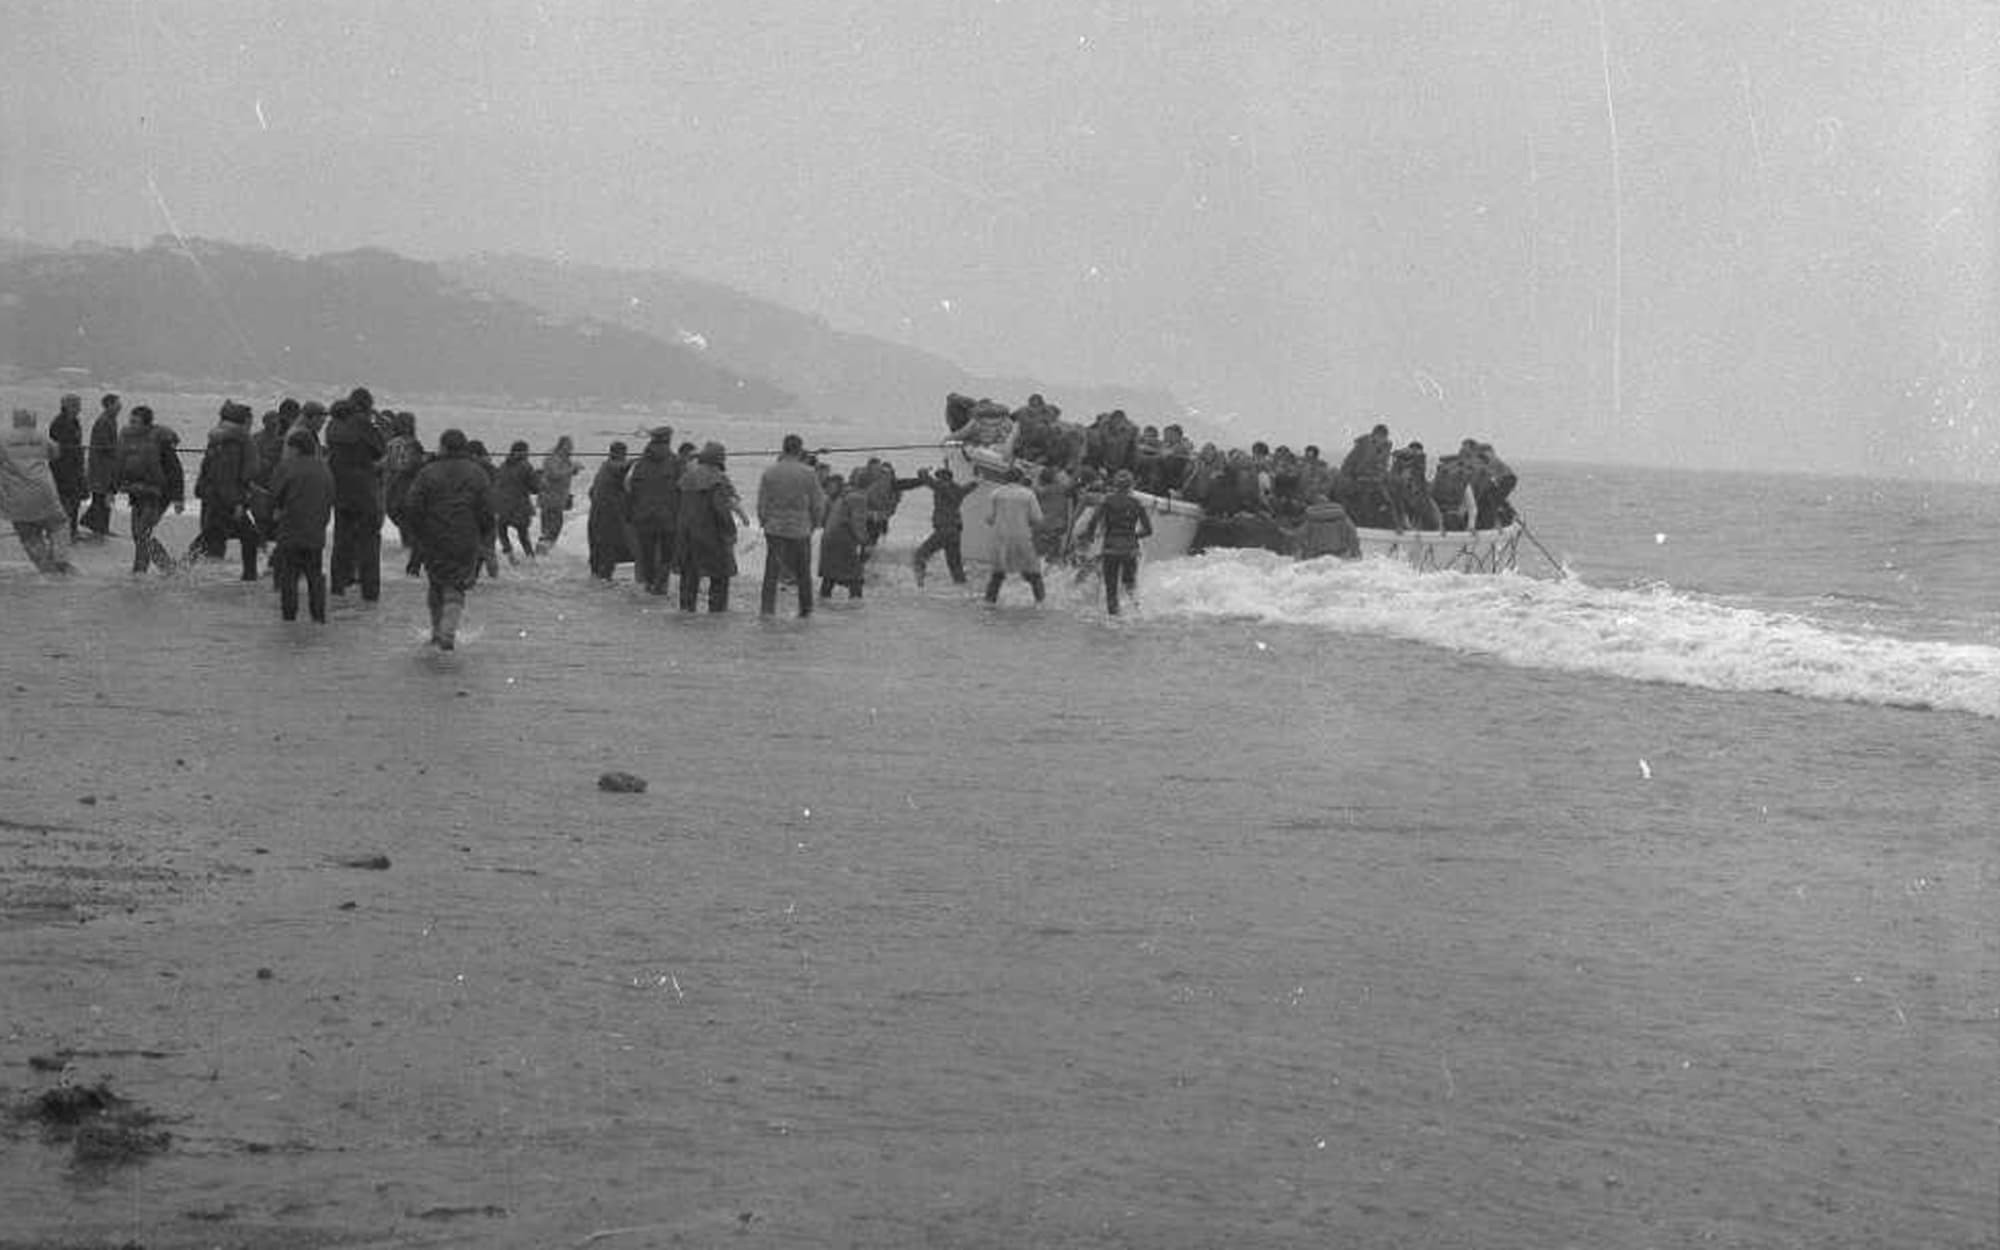 Lifeboat from ship Wahine landing passengers and crew on Seatoun beach, after the ship sank on 10 April 1968, photographed by an Evening Post staff photographer.